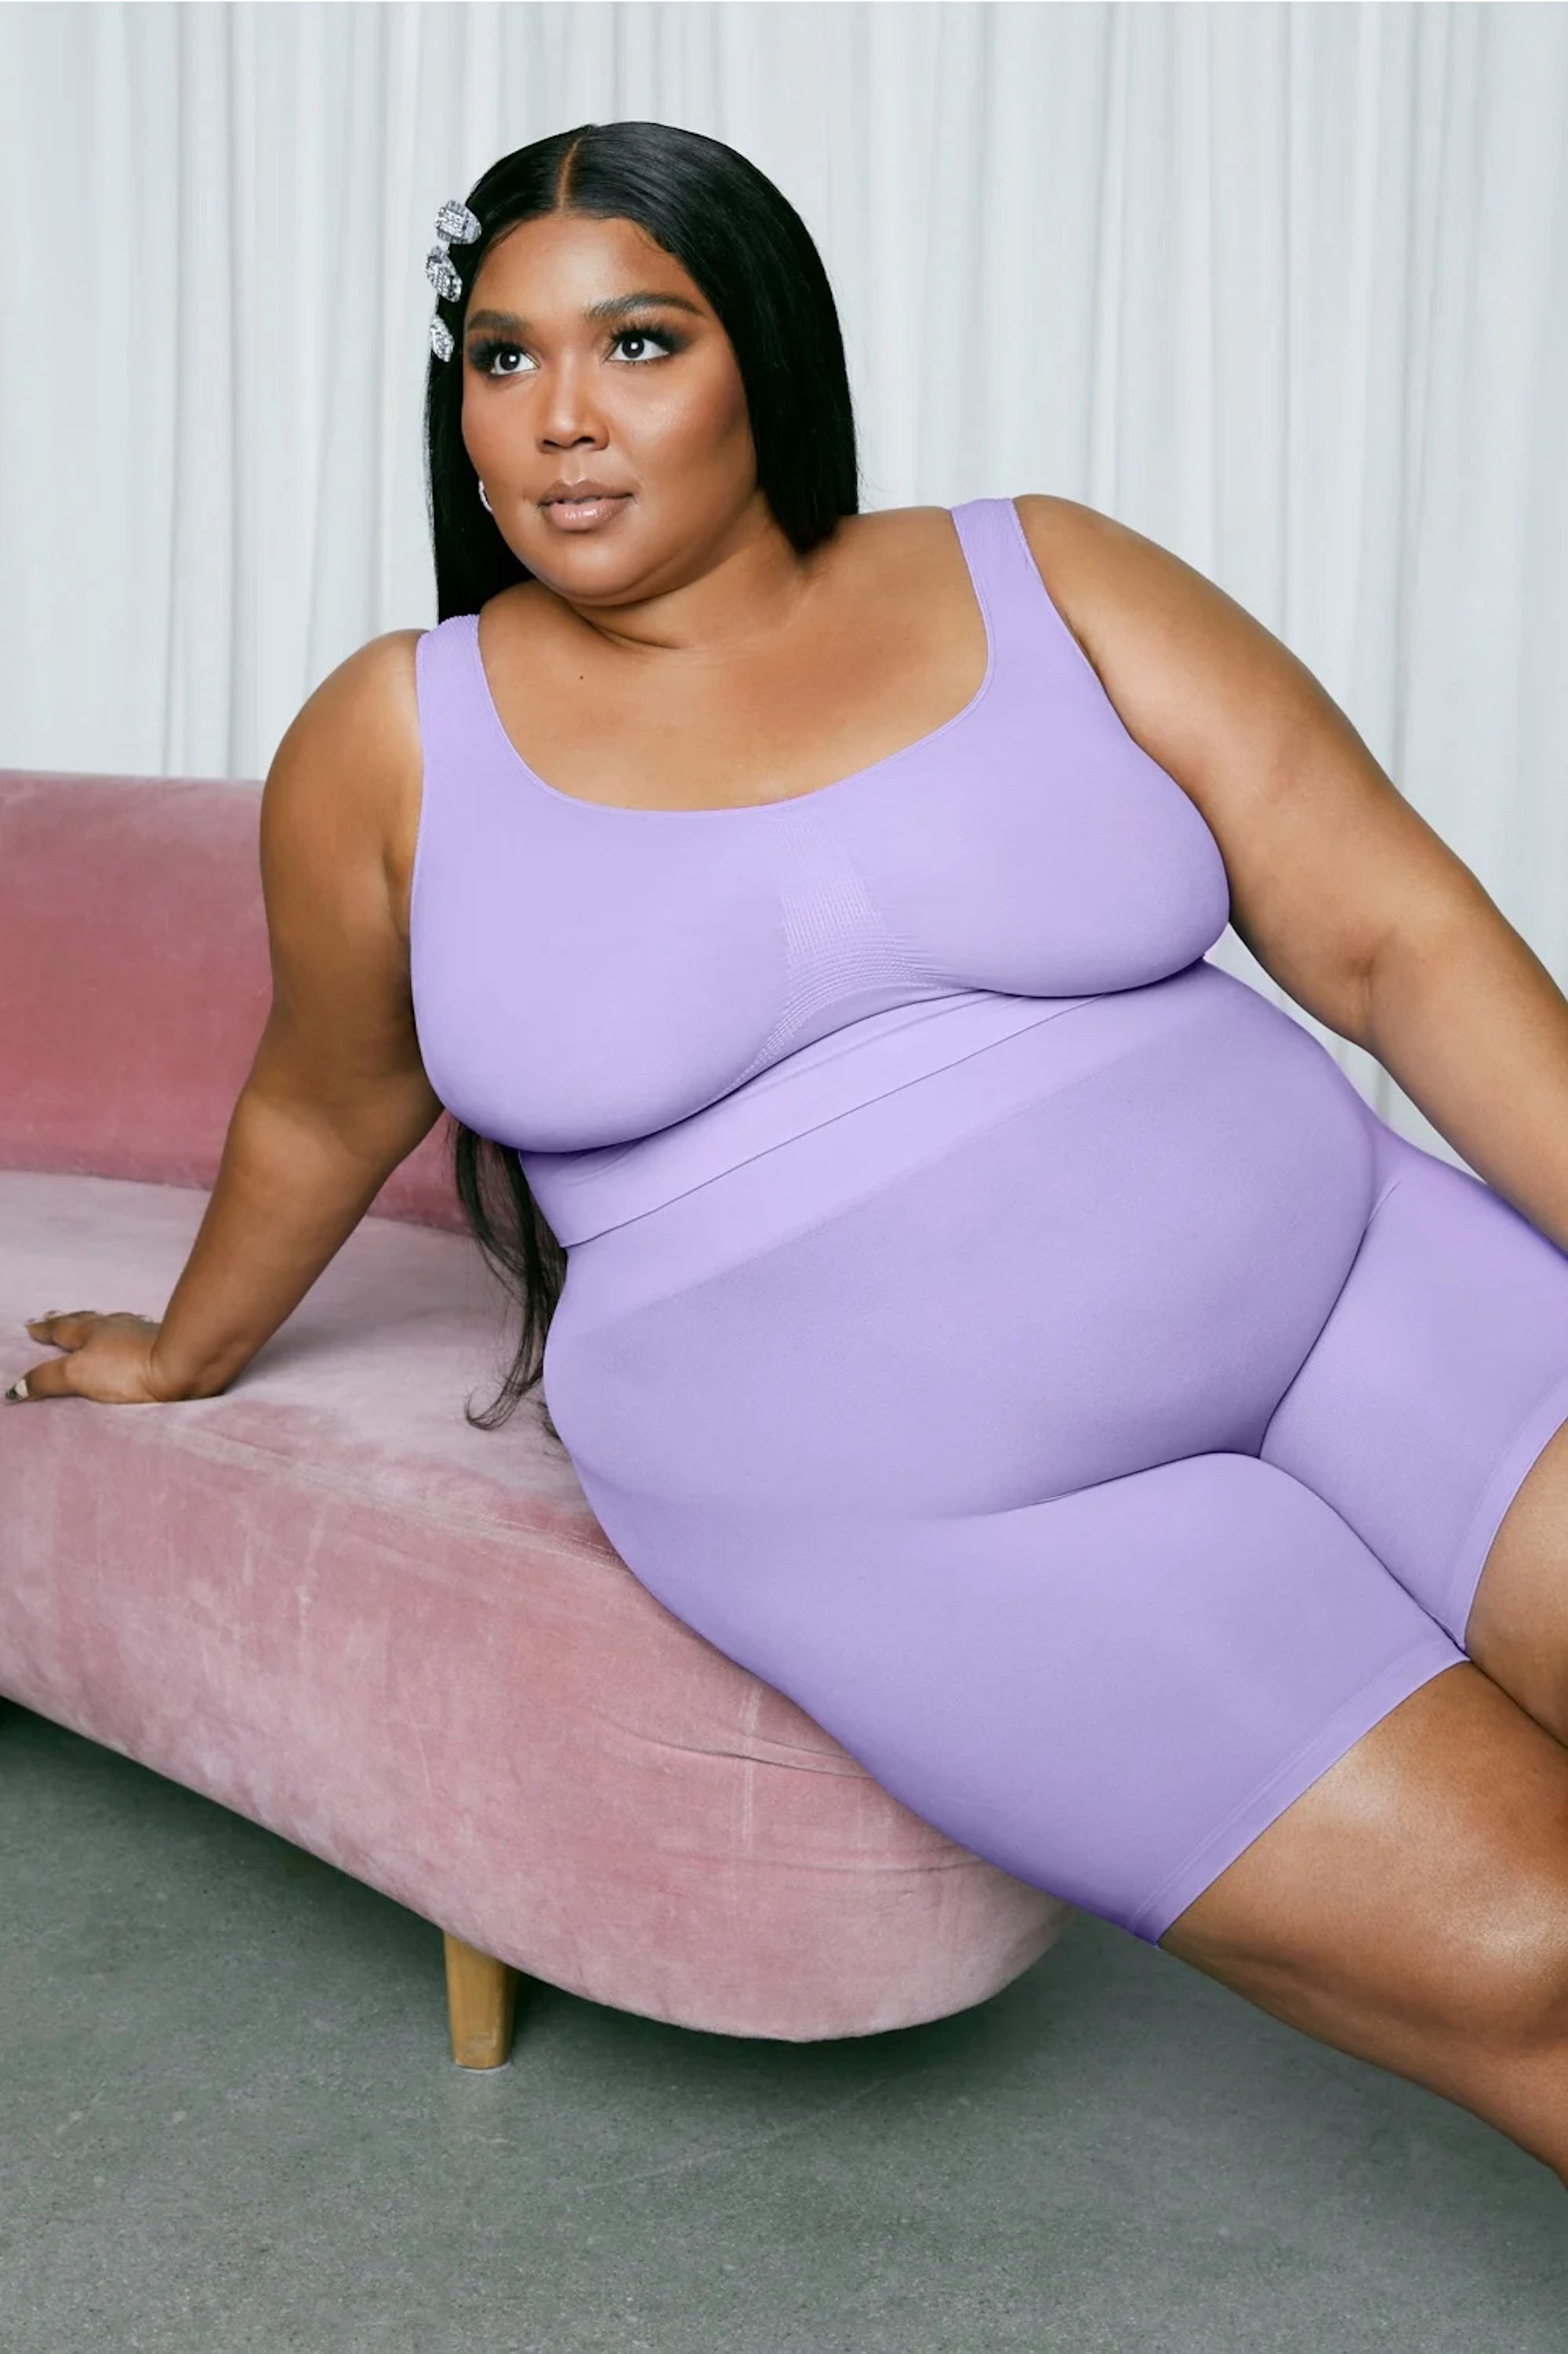 brittany bemis recommends fat women in girdles pic